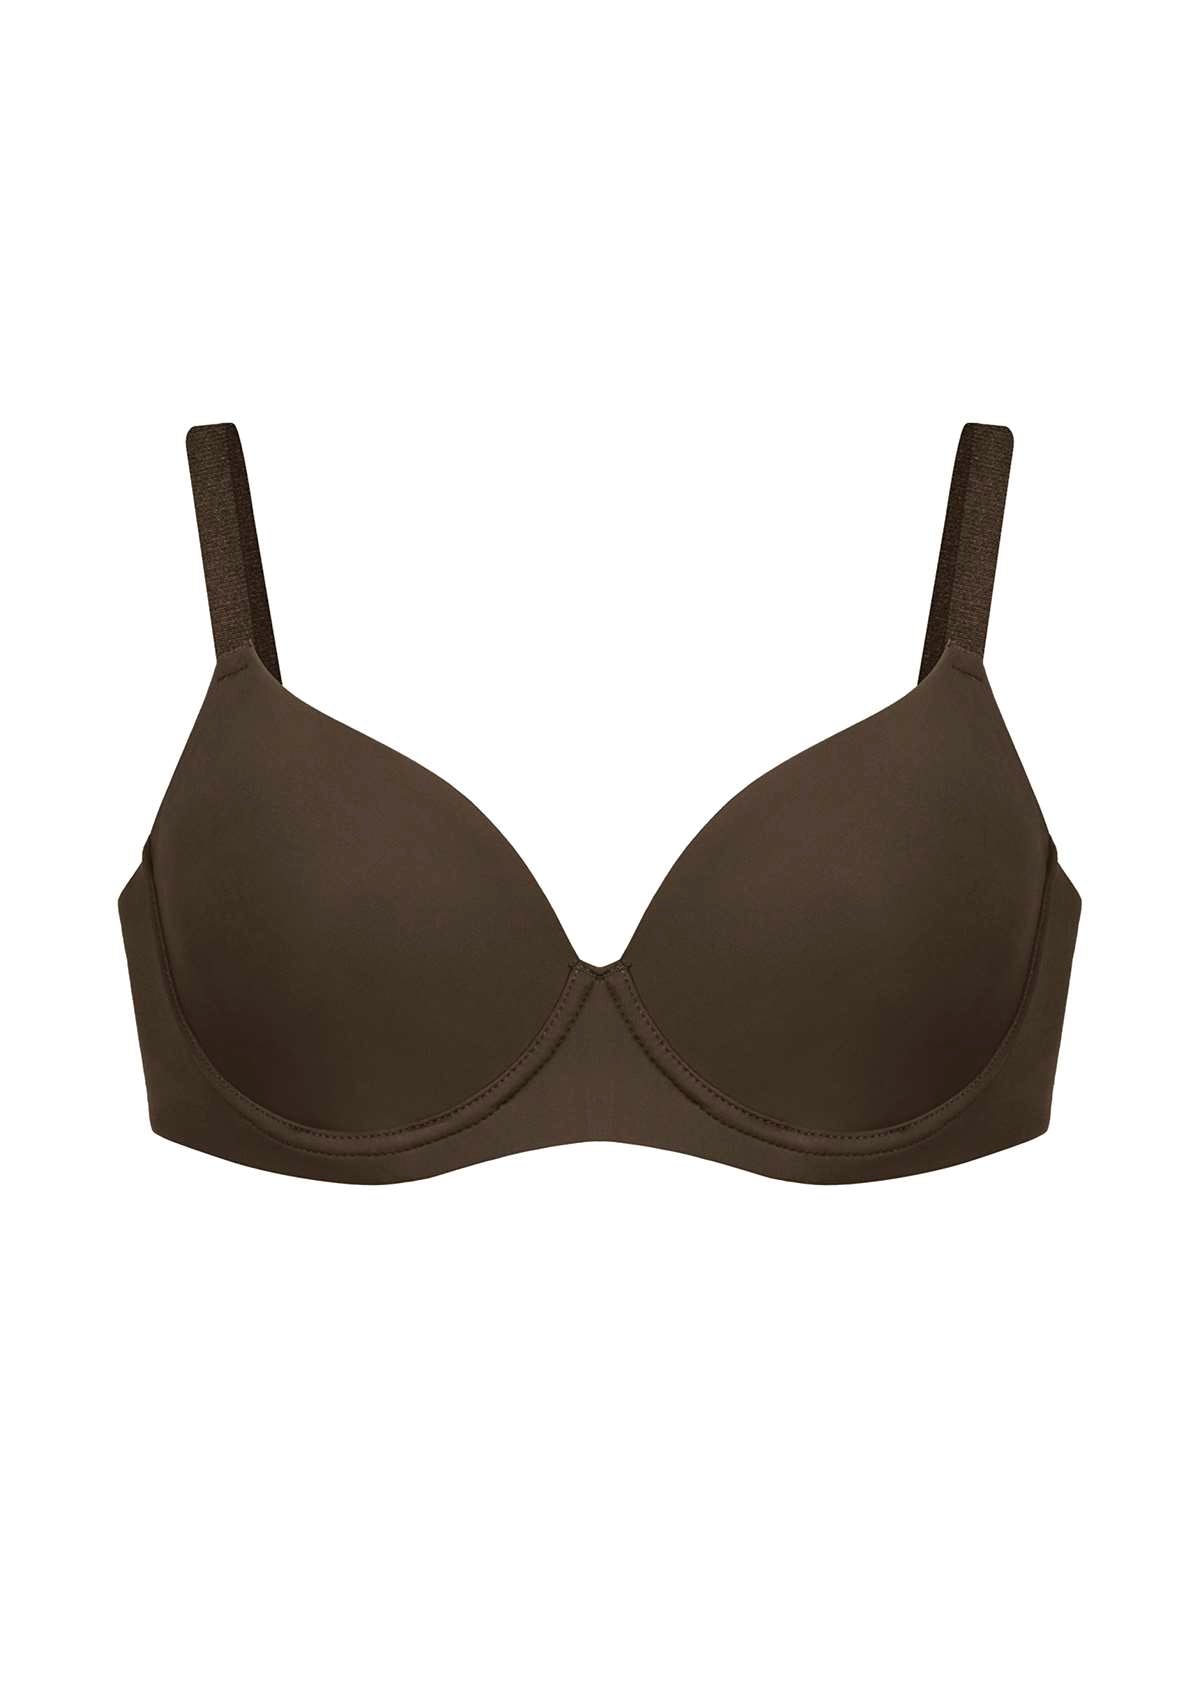 HSIA Gemma Smooth Supportive Padded T-shirt Bra - For Full Figures - Cocoa Brown / 42 / C